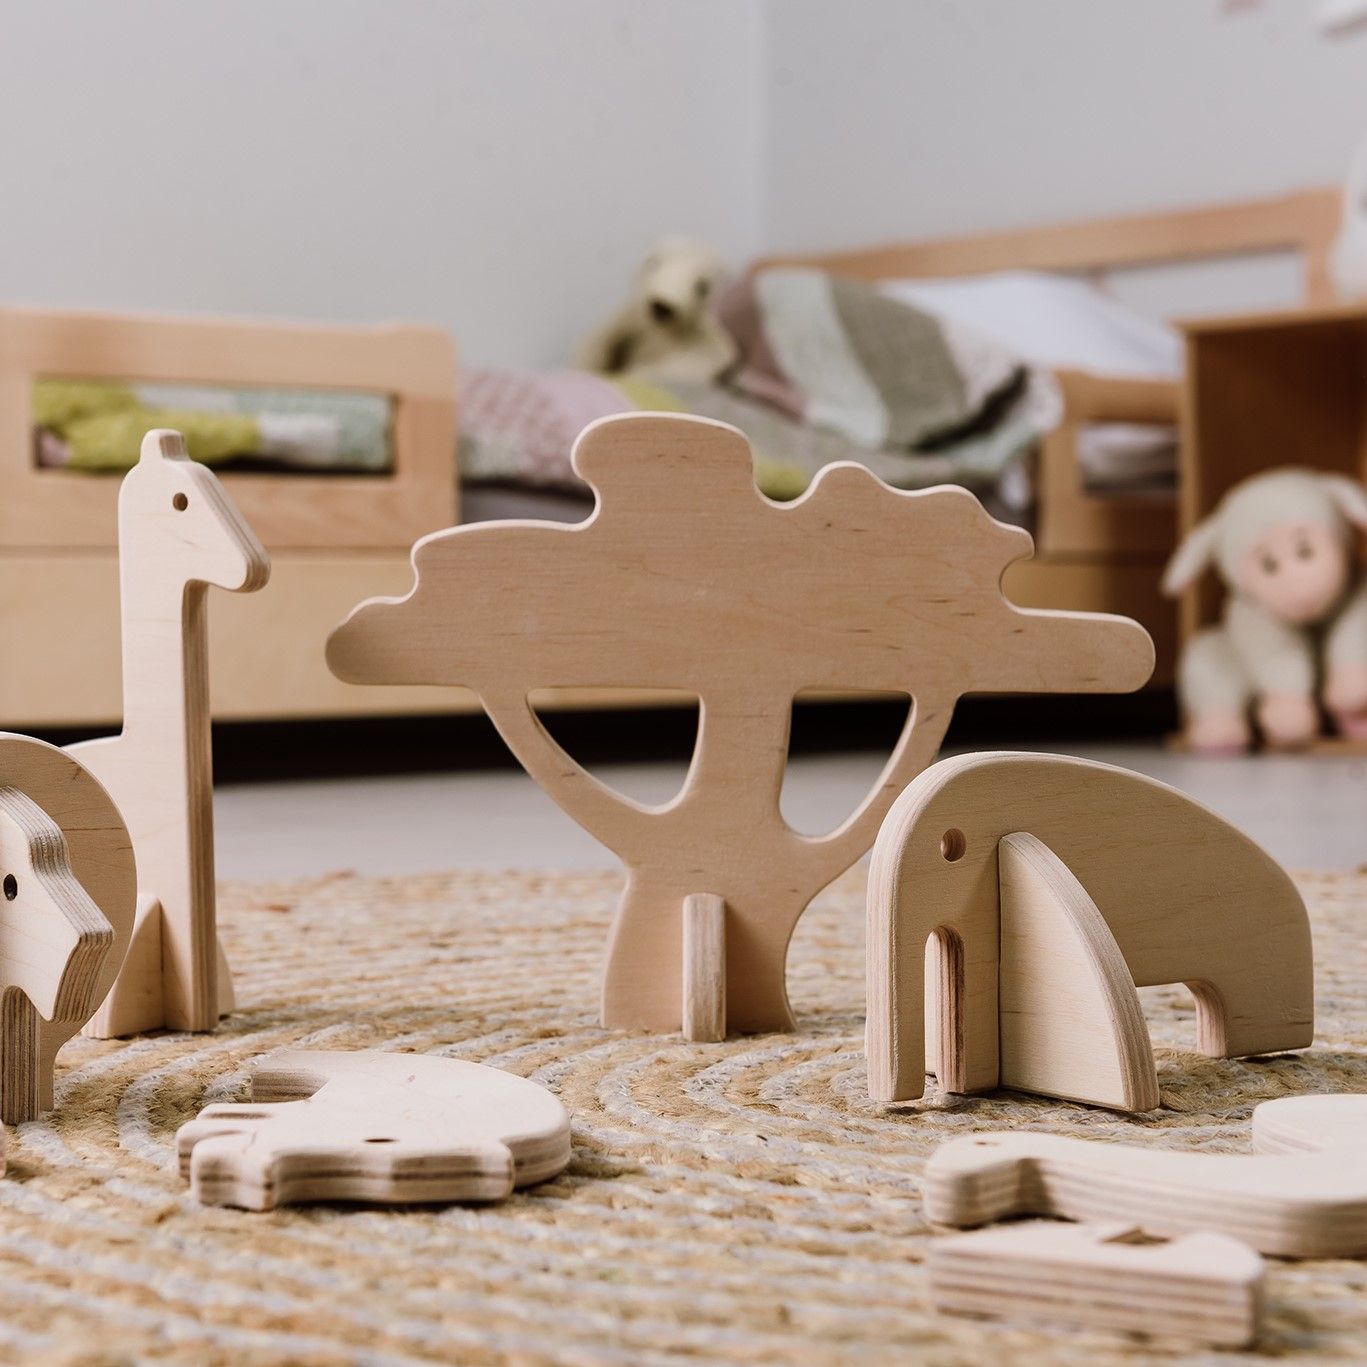 Wooden animals set AFRICA, unpainted gift for kids